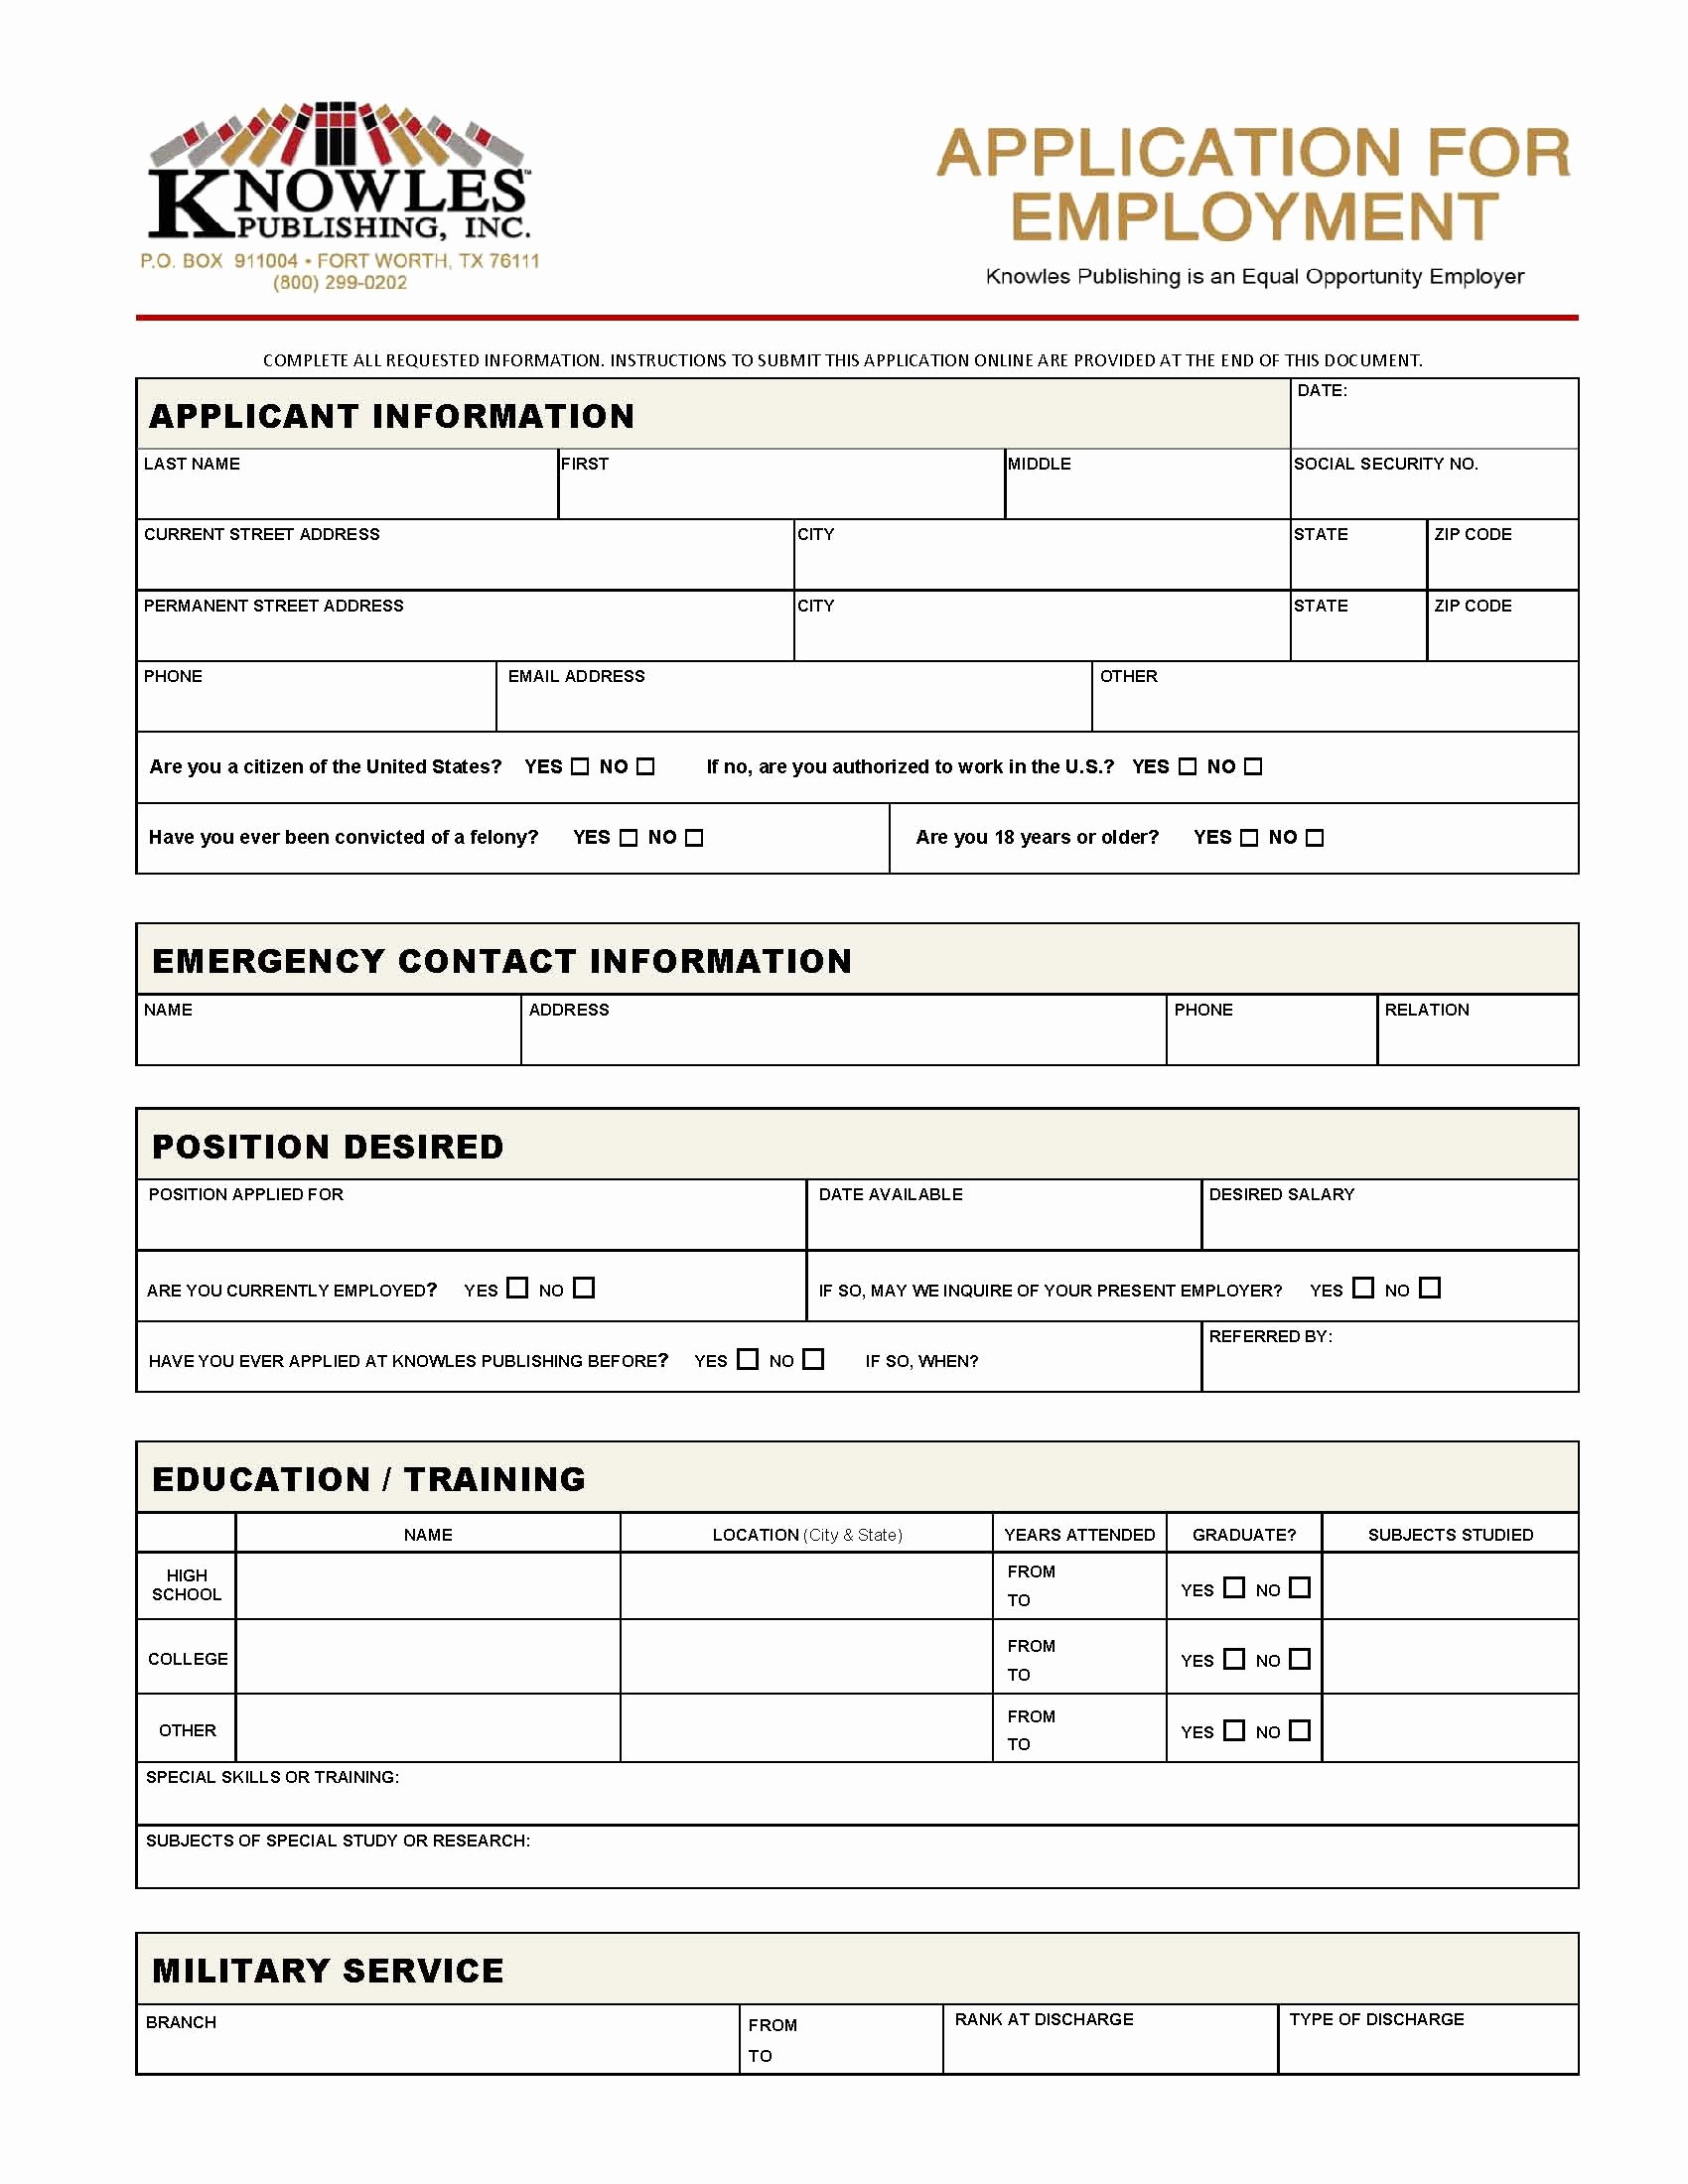 Application for Employment form Free Awesome Jobs Jobs Picture Job Application